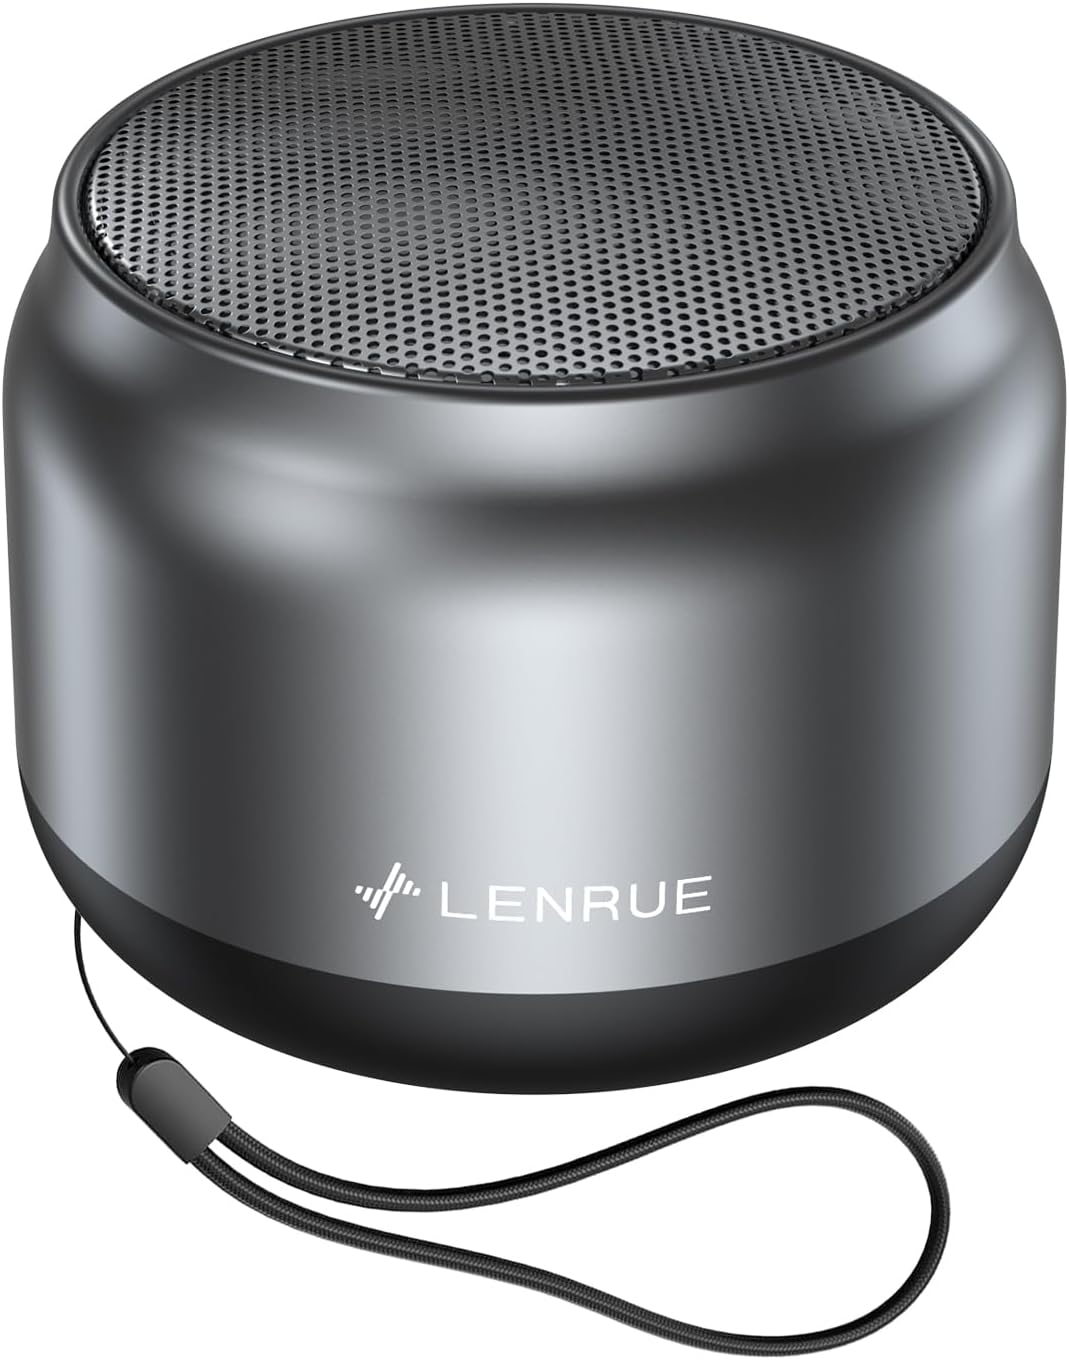 LENRUE Bluetooth Speaker,Small Portable Speakers,Mini Wireless Speaker with 5W Clear Sound,15H Playback Time,Gift for Men/Women/Kids/Boys/Girls,Home and Outdoor Activities (Gray)